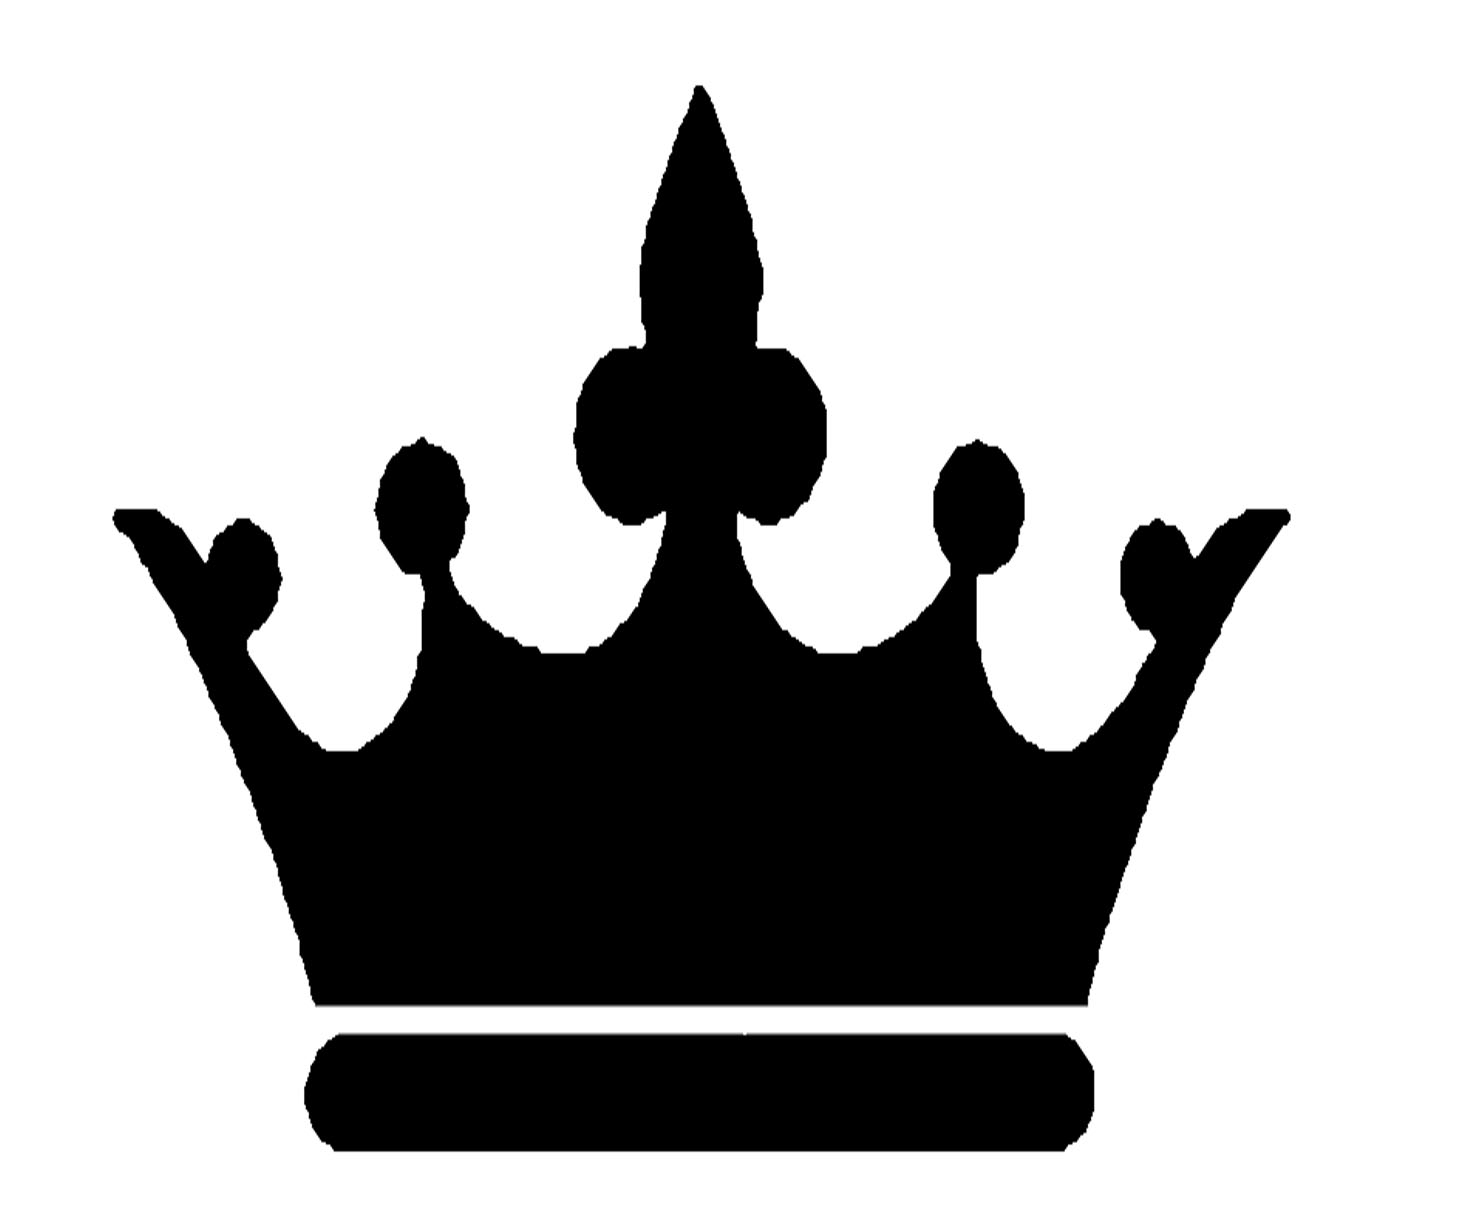 crown image clipart - photo #31